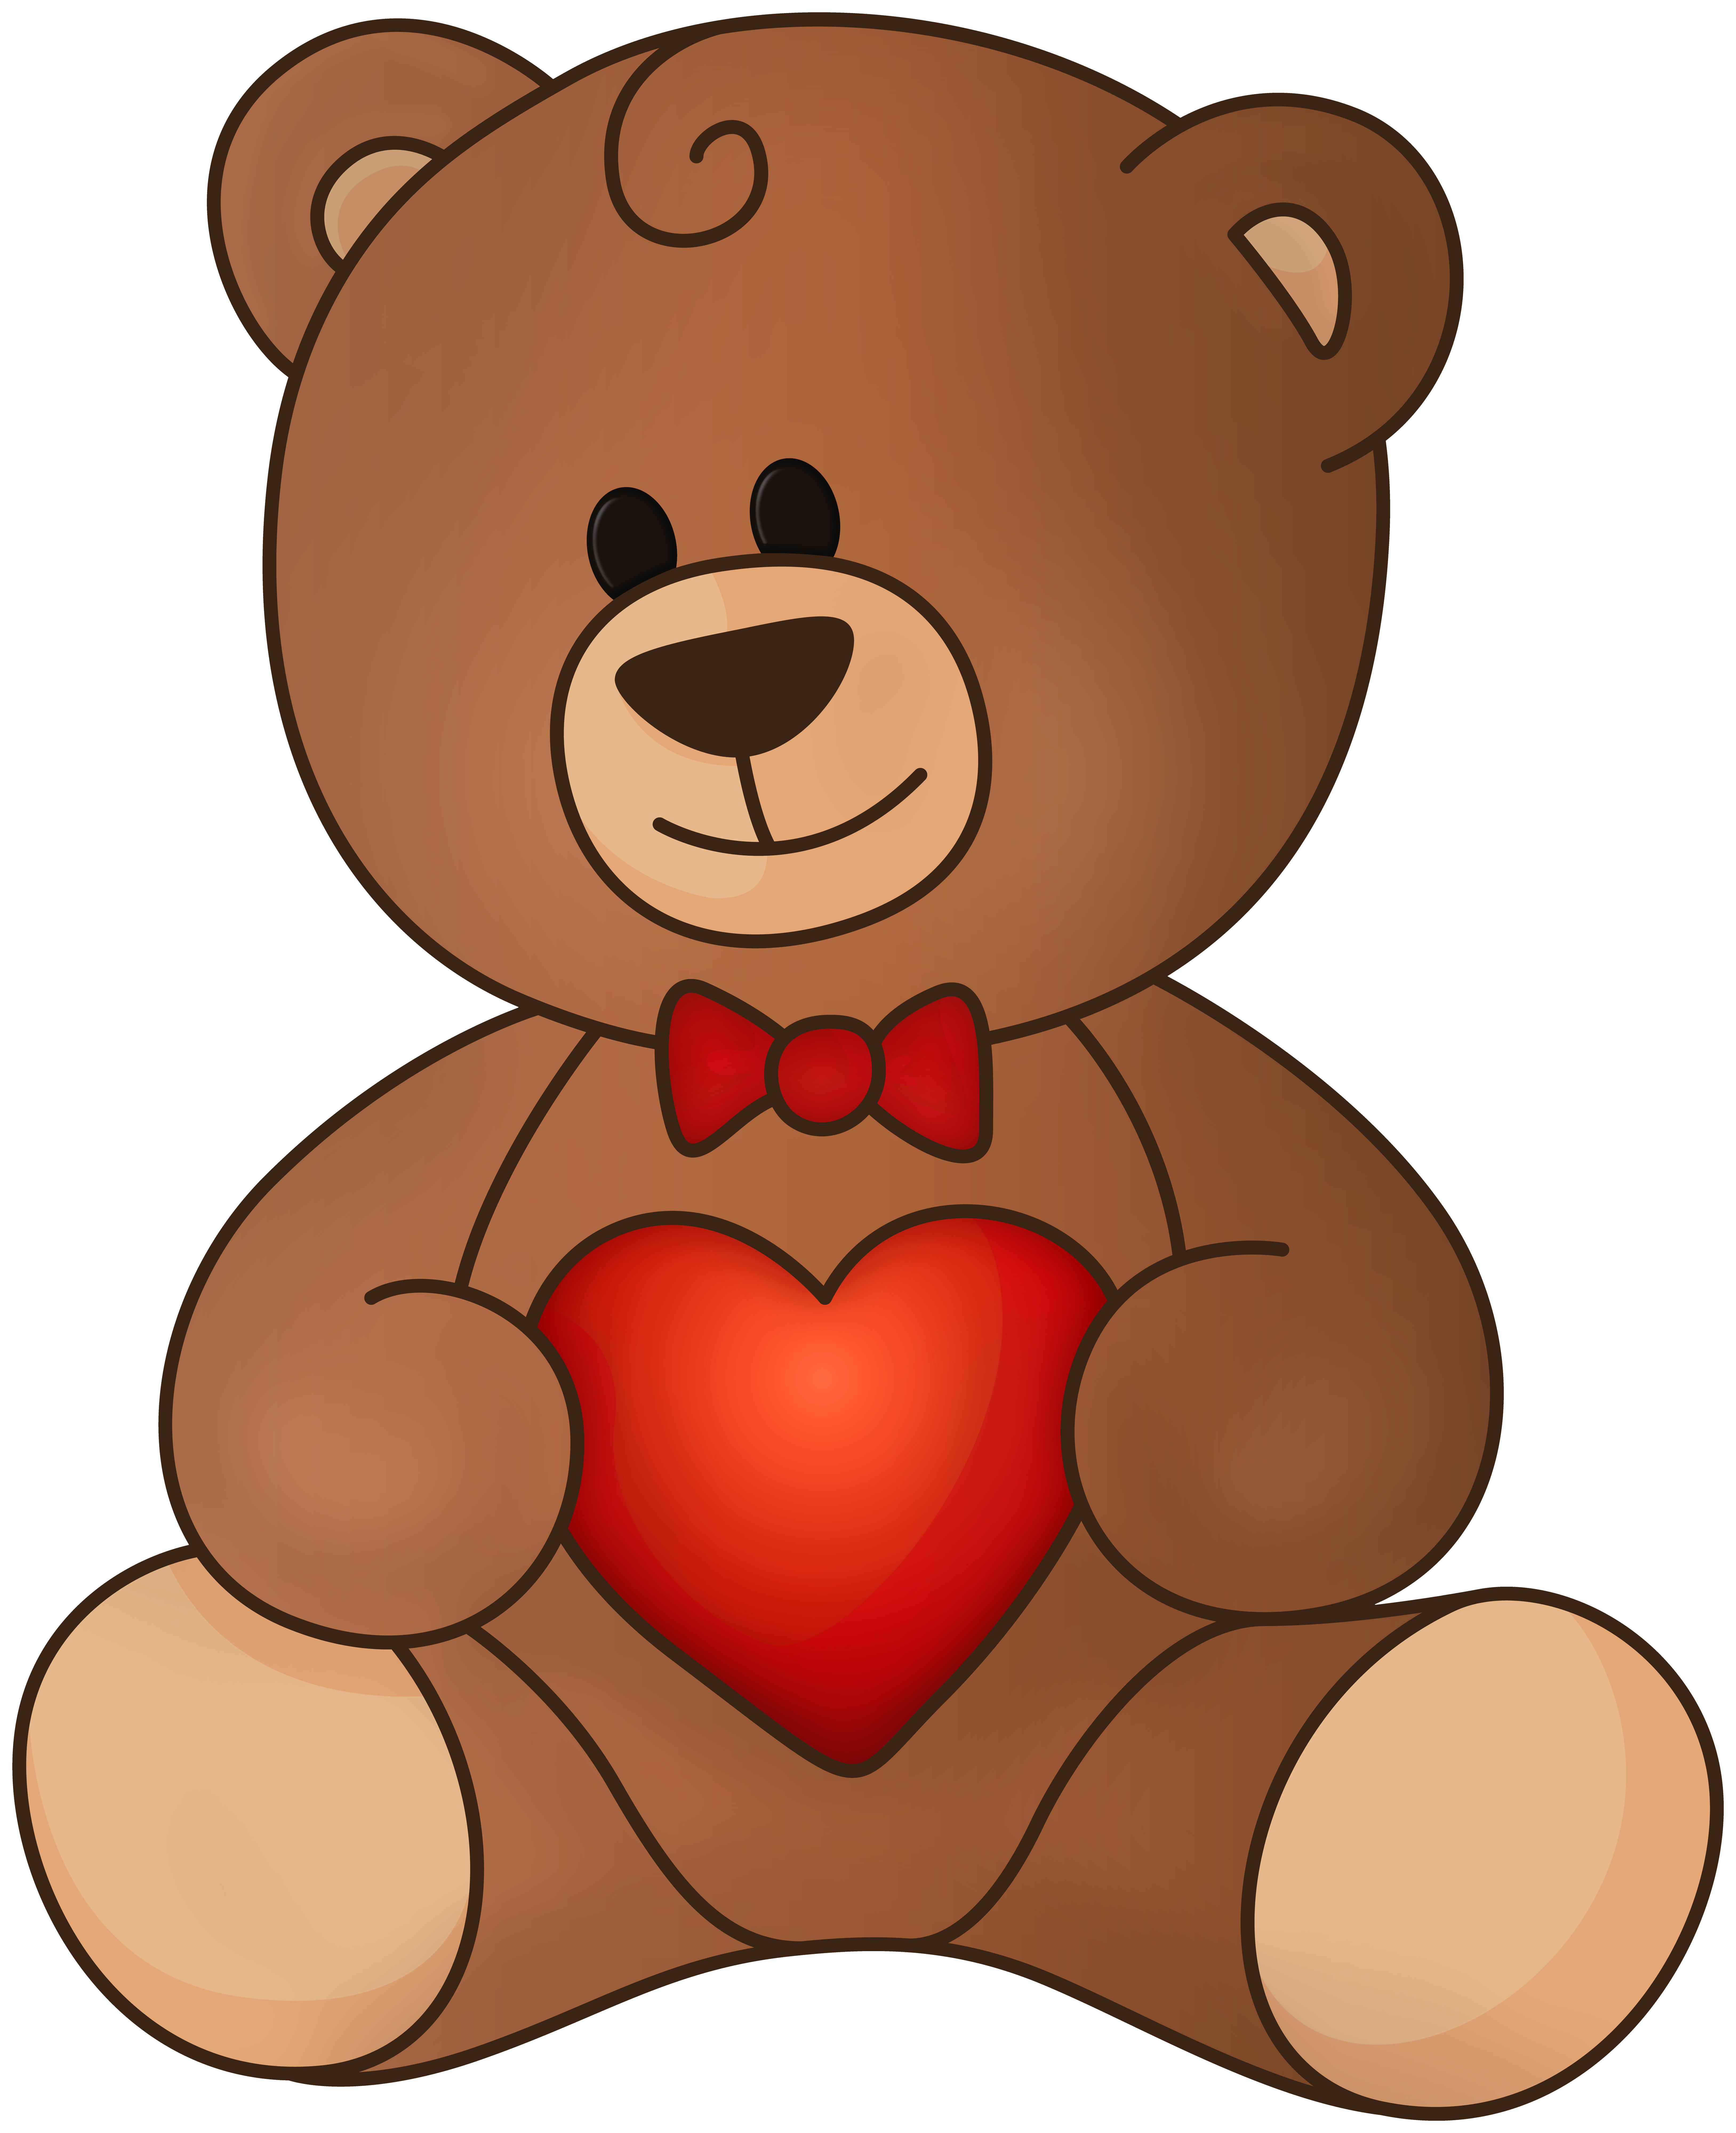 teddy bear pictures with heart